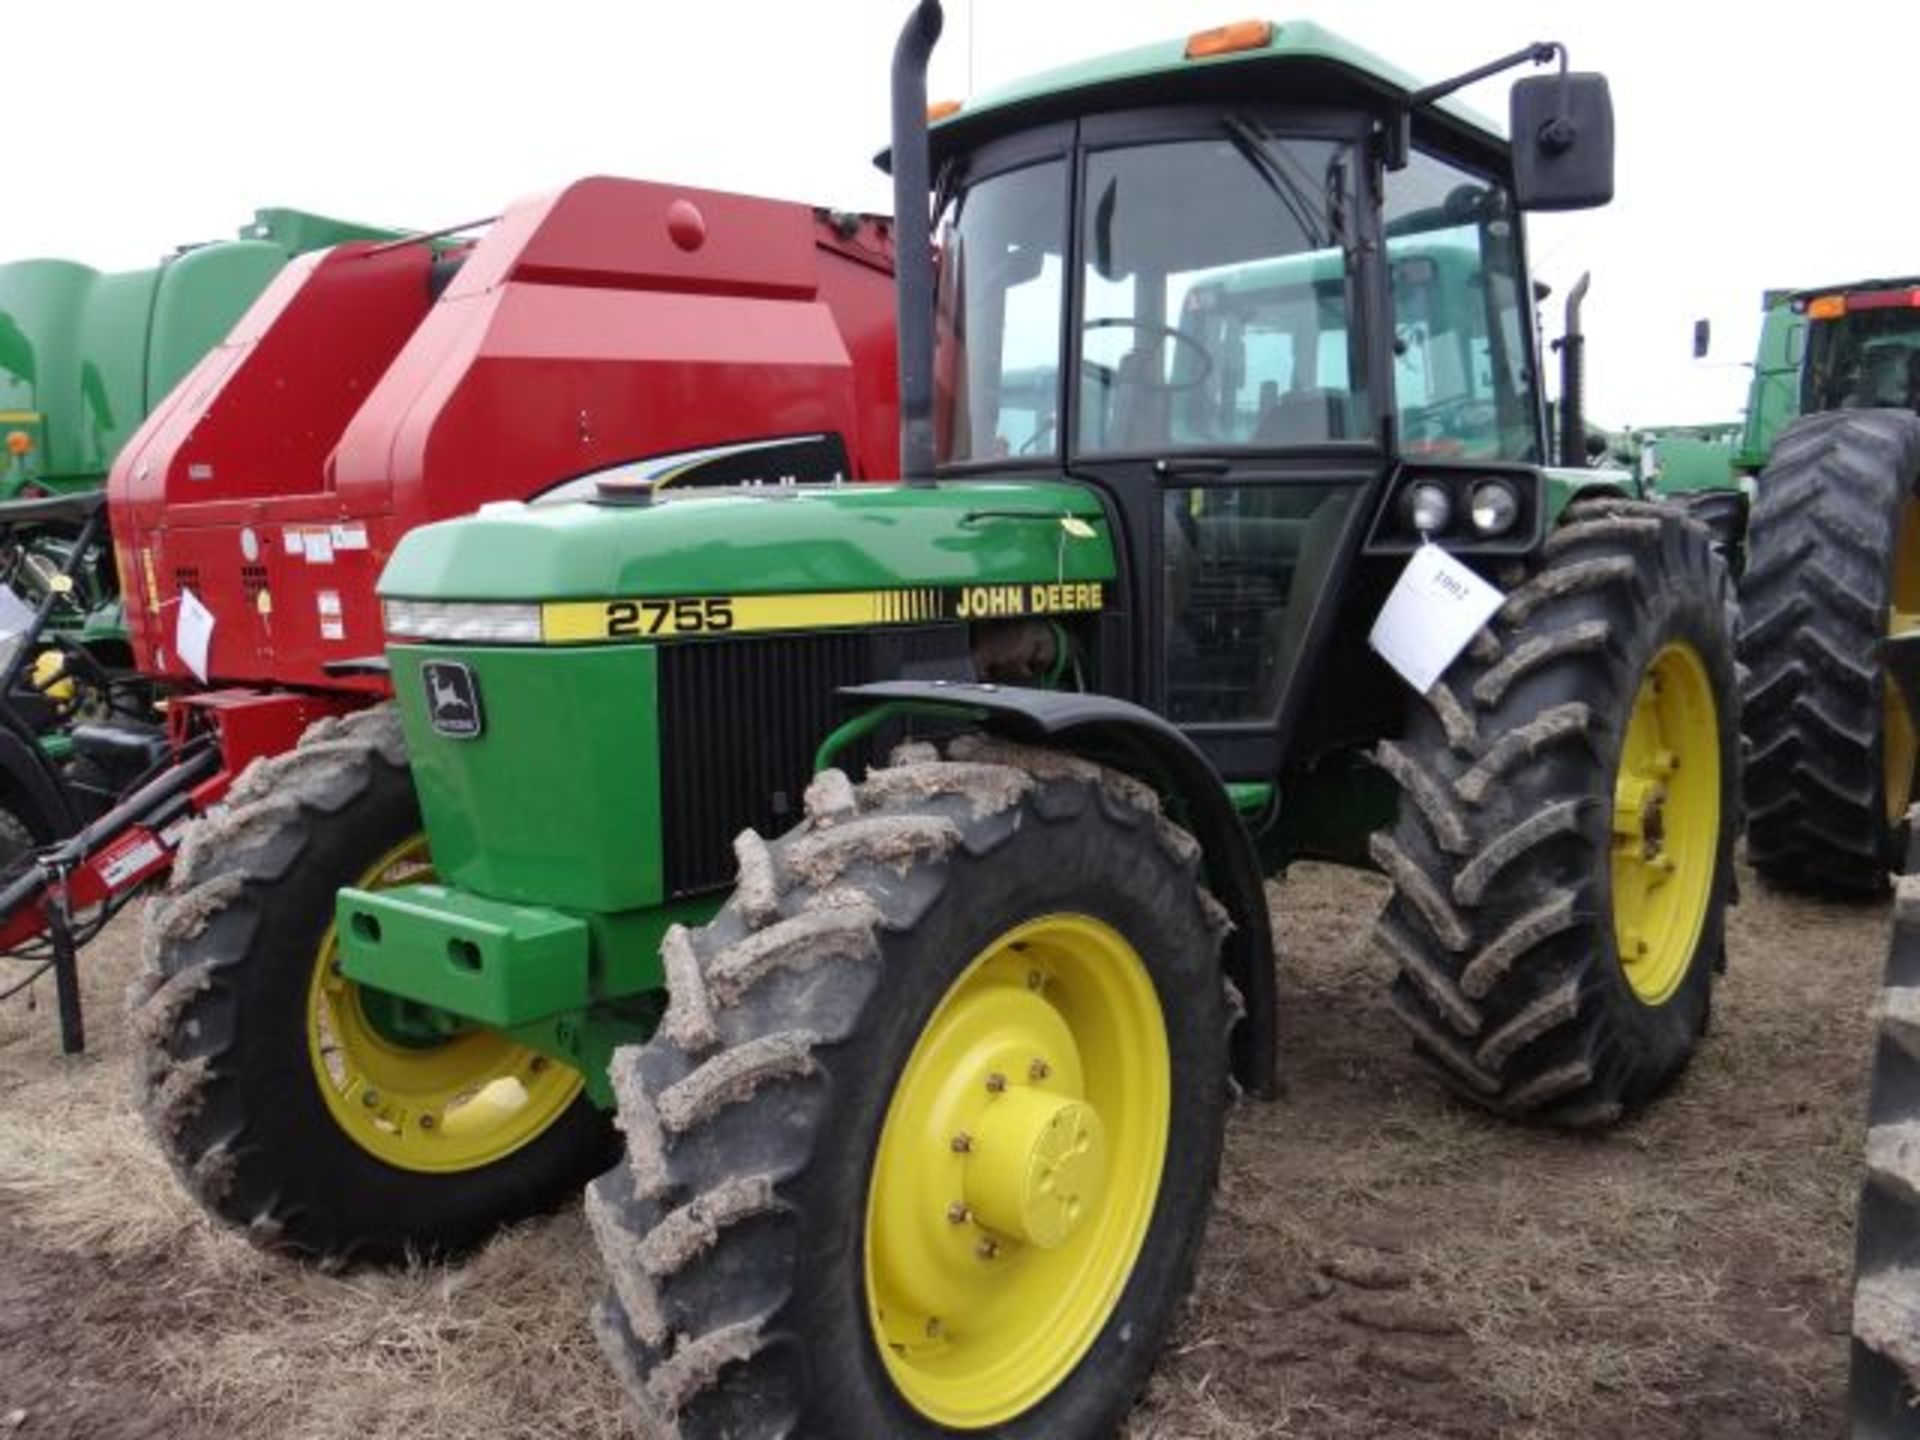 Lot # 1002 JD 2755 Tractor 5954 hrs, MFWD, Dual PTO, 2 SCV